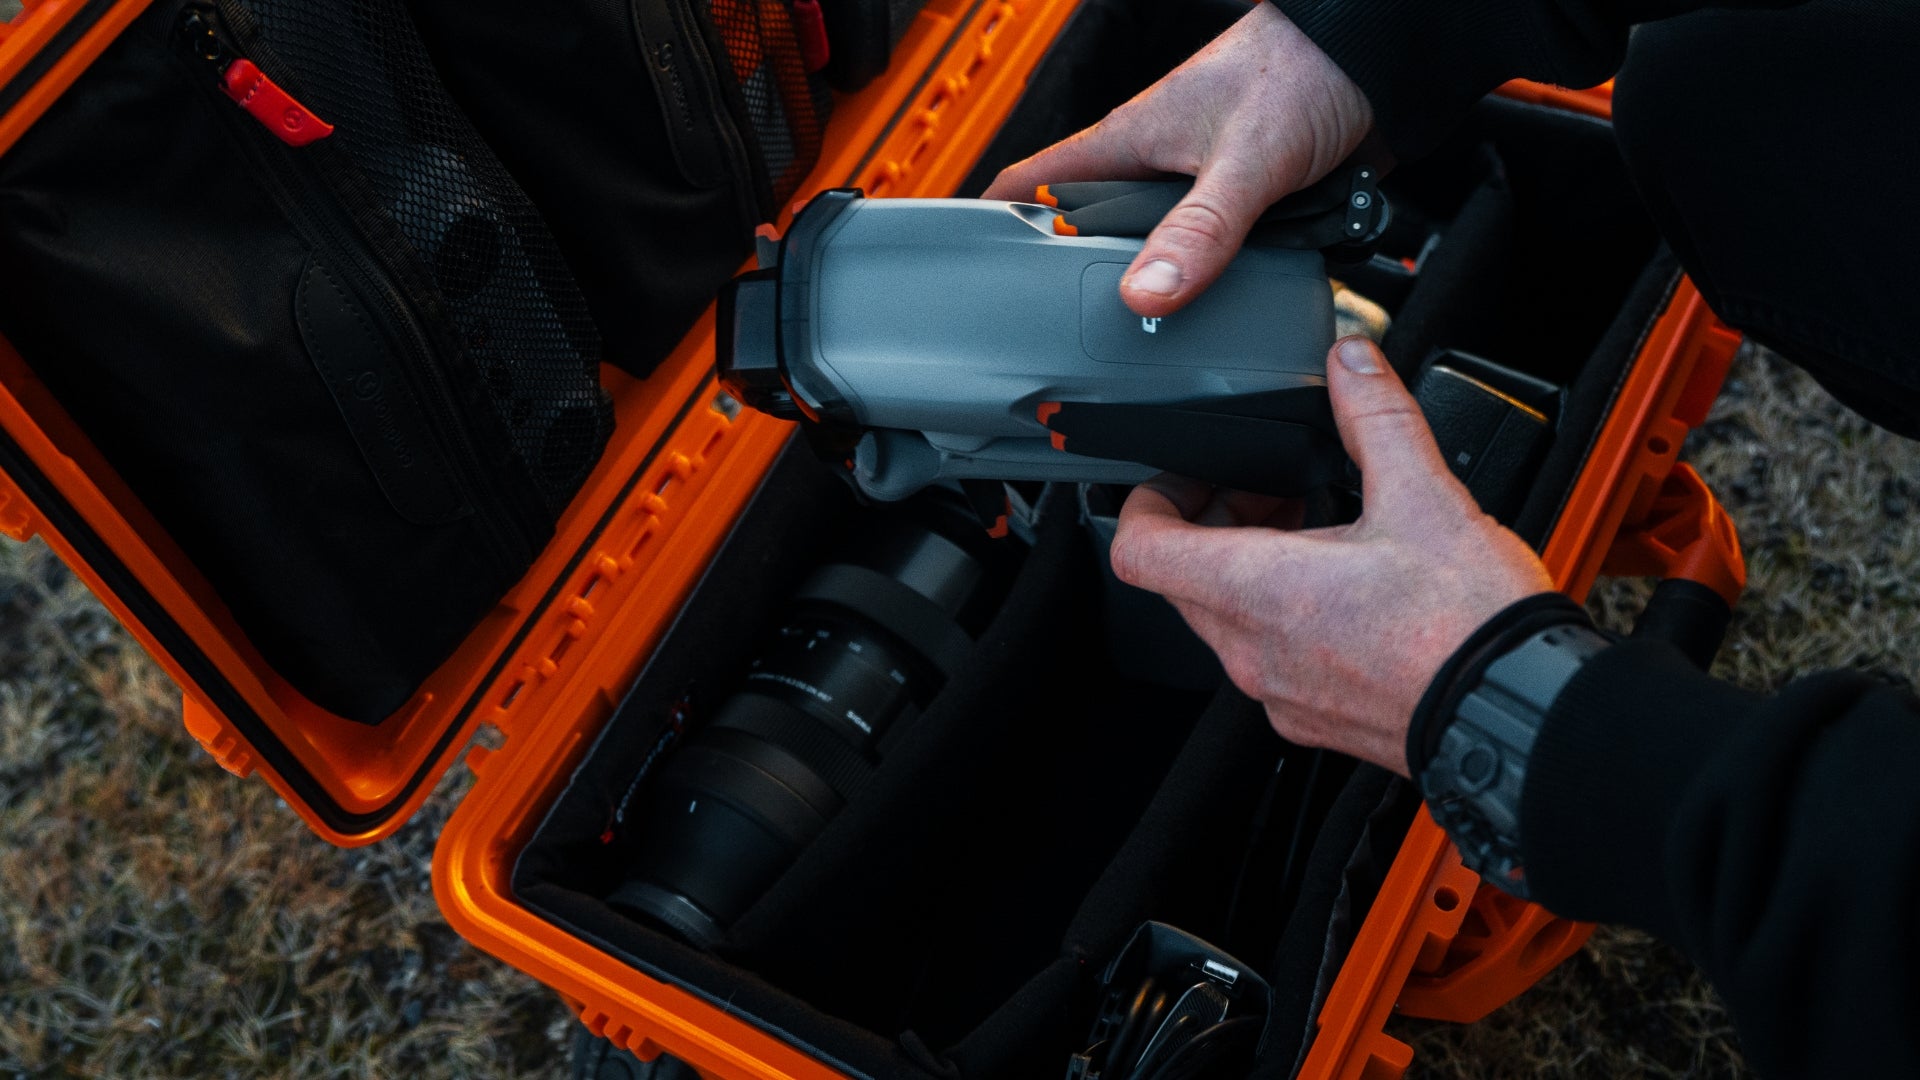 Insightful Analysis: Waterproof Hard Cases for Electronics